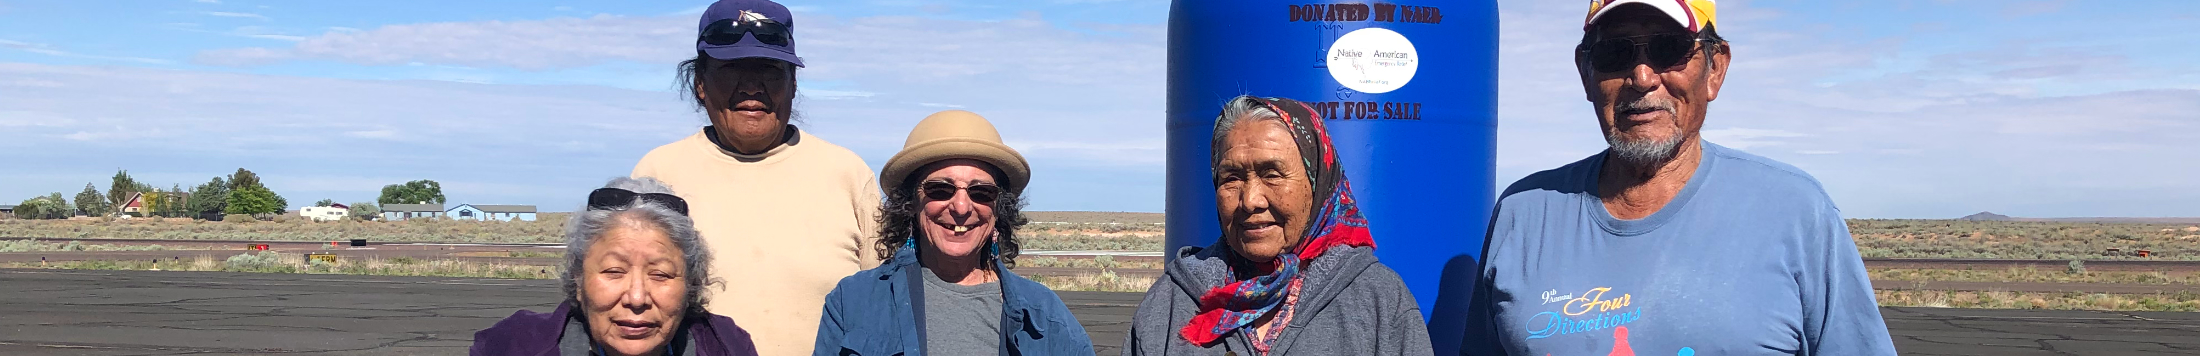 Water is life in the Navajo Nation